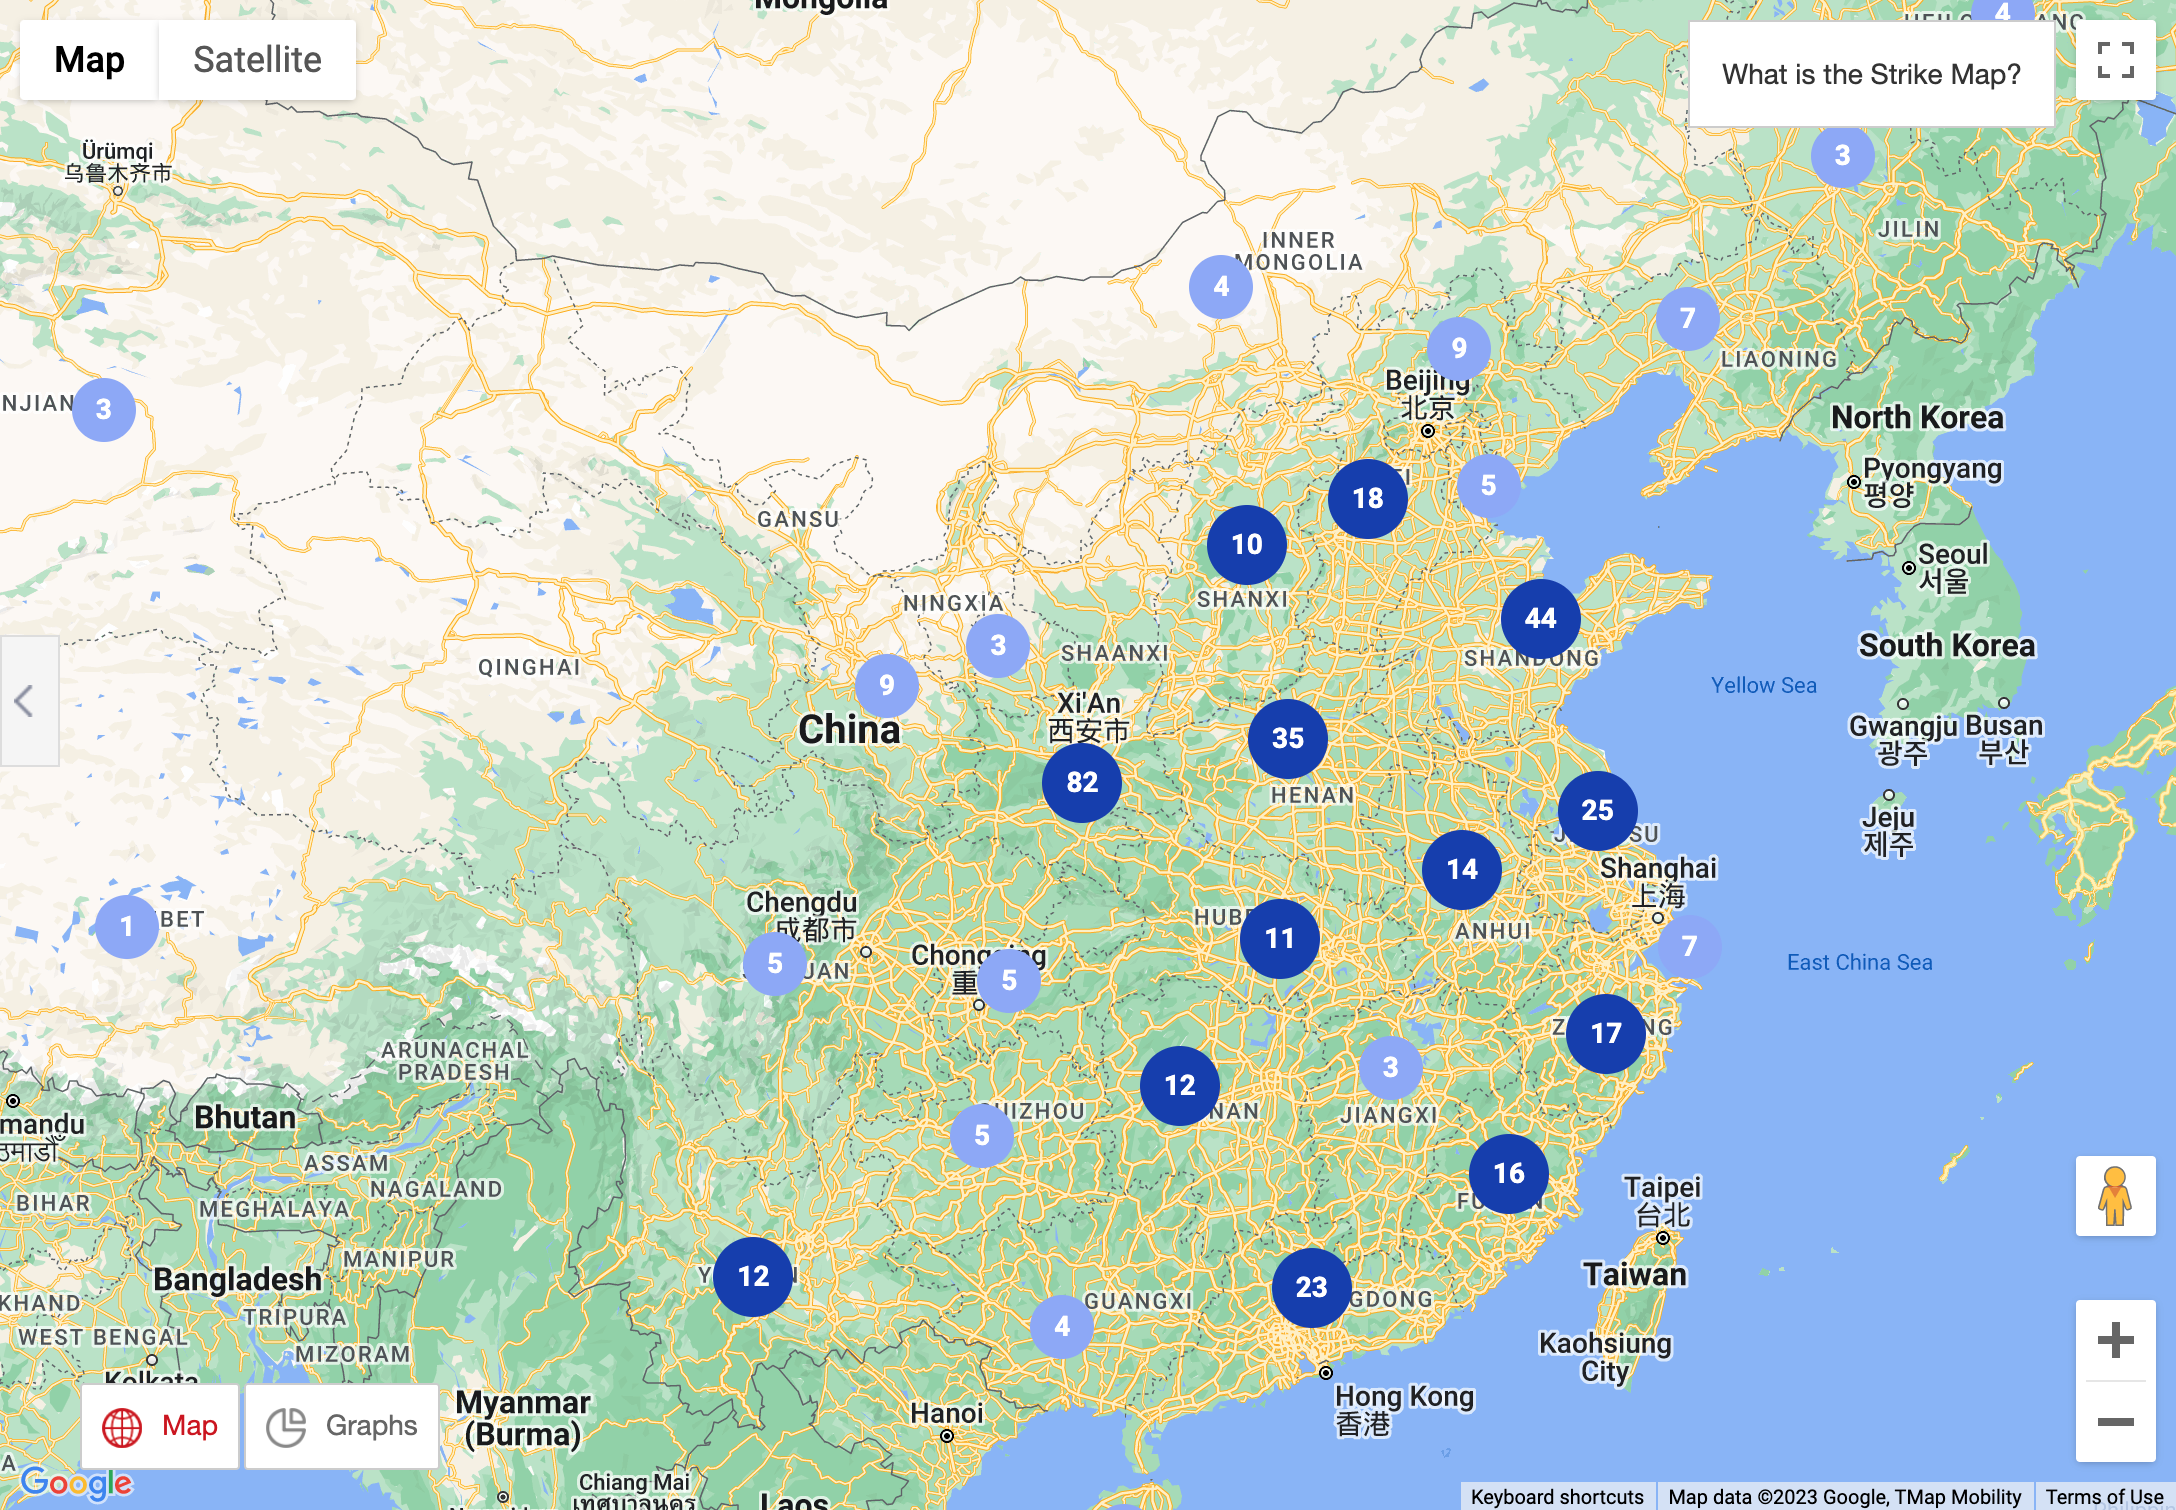 A screenshot of CLB's Strike Map shows incidents in the construction industry in 2022, with notable concentrations in China's inland provinces